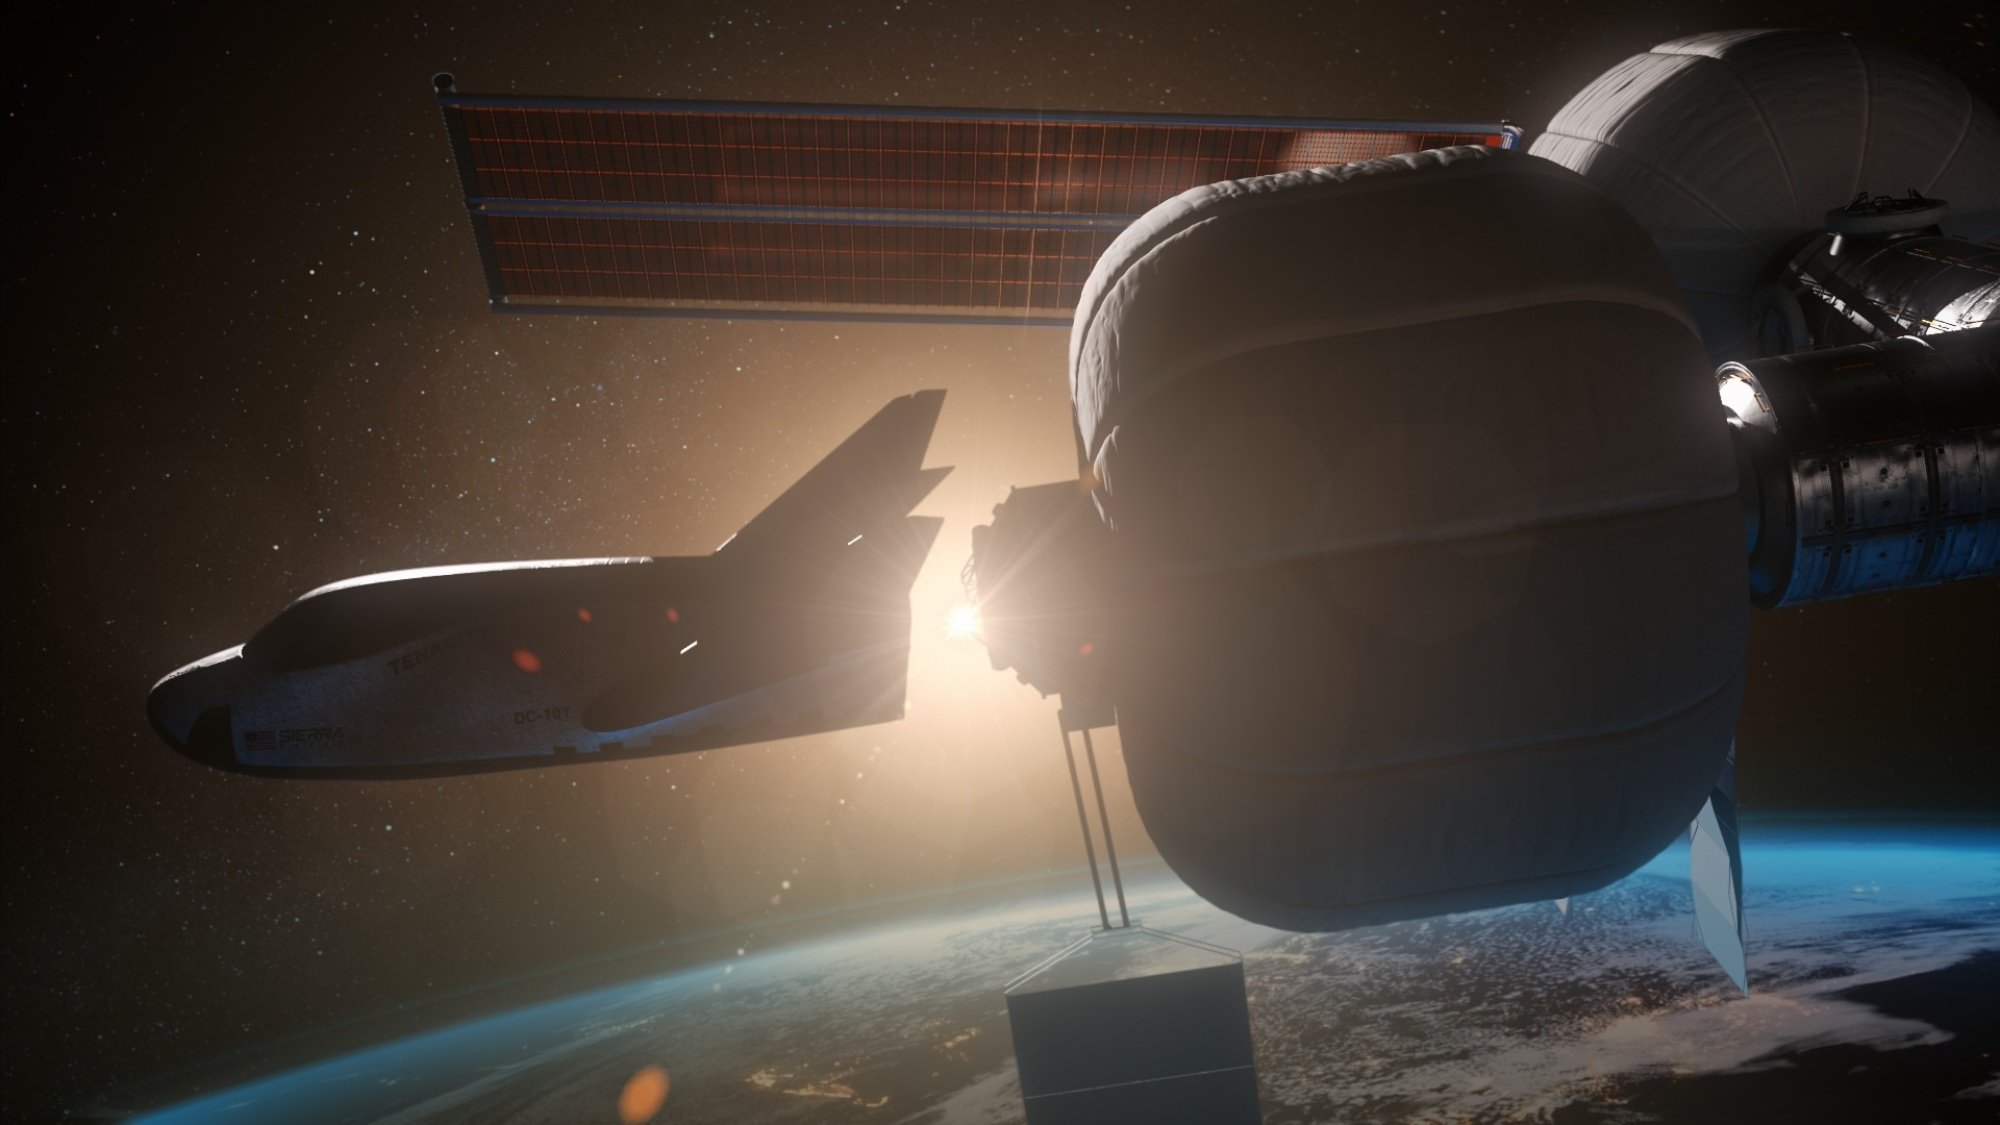 the spacecraft Dream Chaser docking with a space habitat